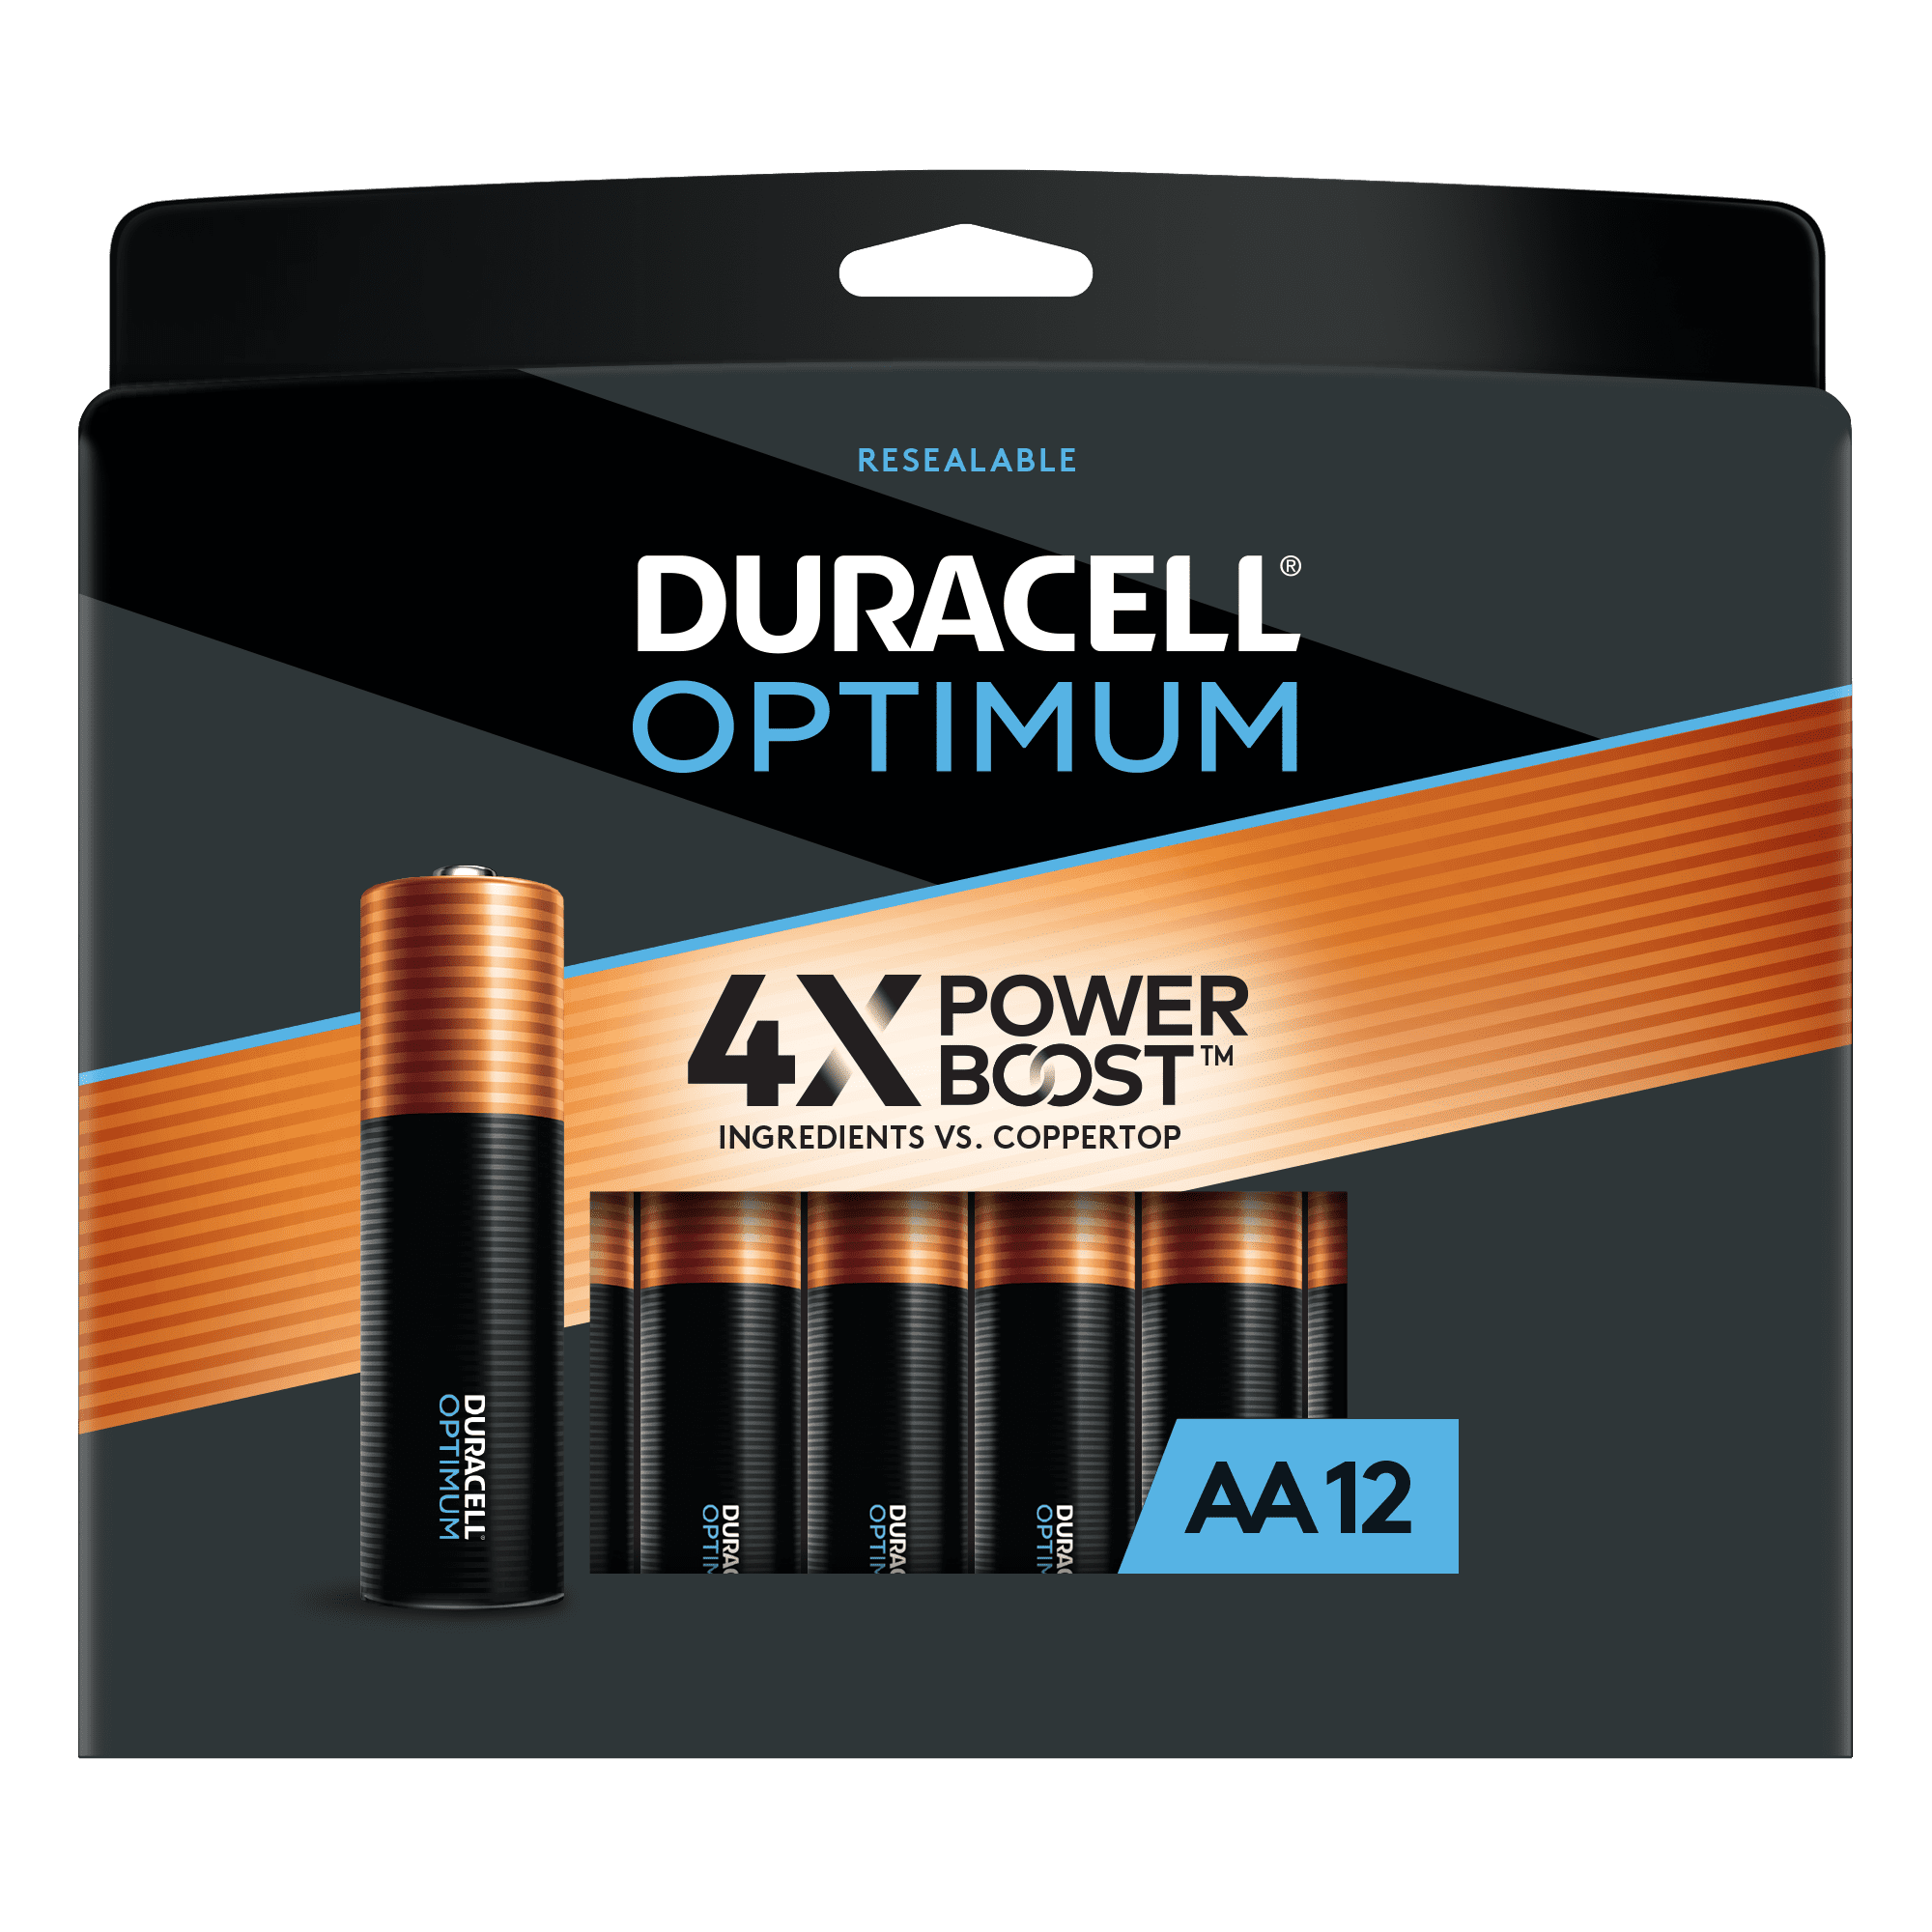 Duracell Optimum AA Battery with 4X POWER BOOST™, 12 Pack Resealable .